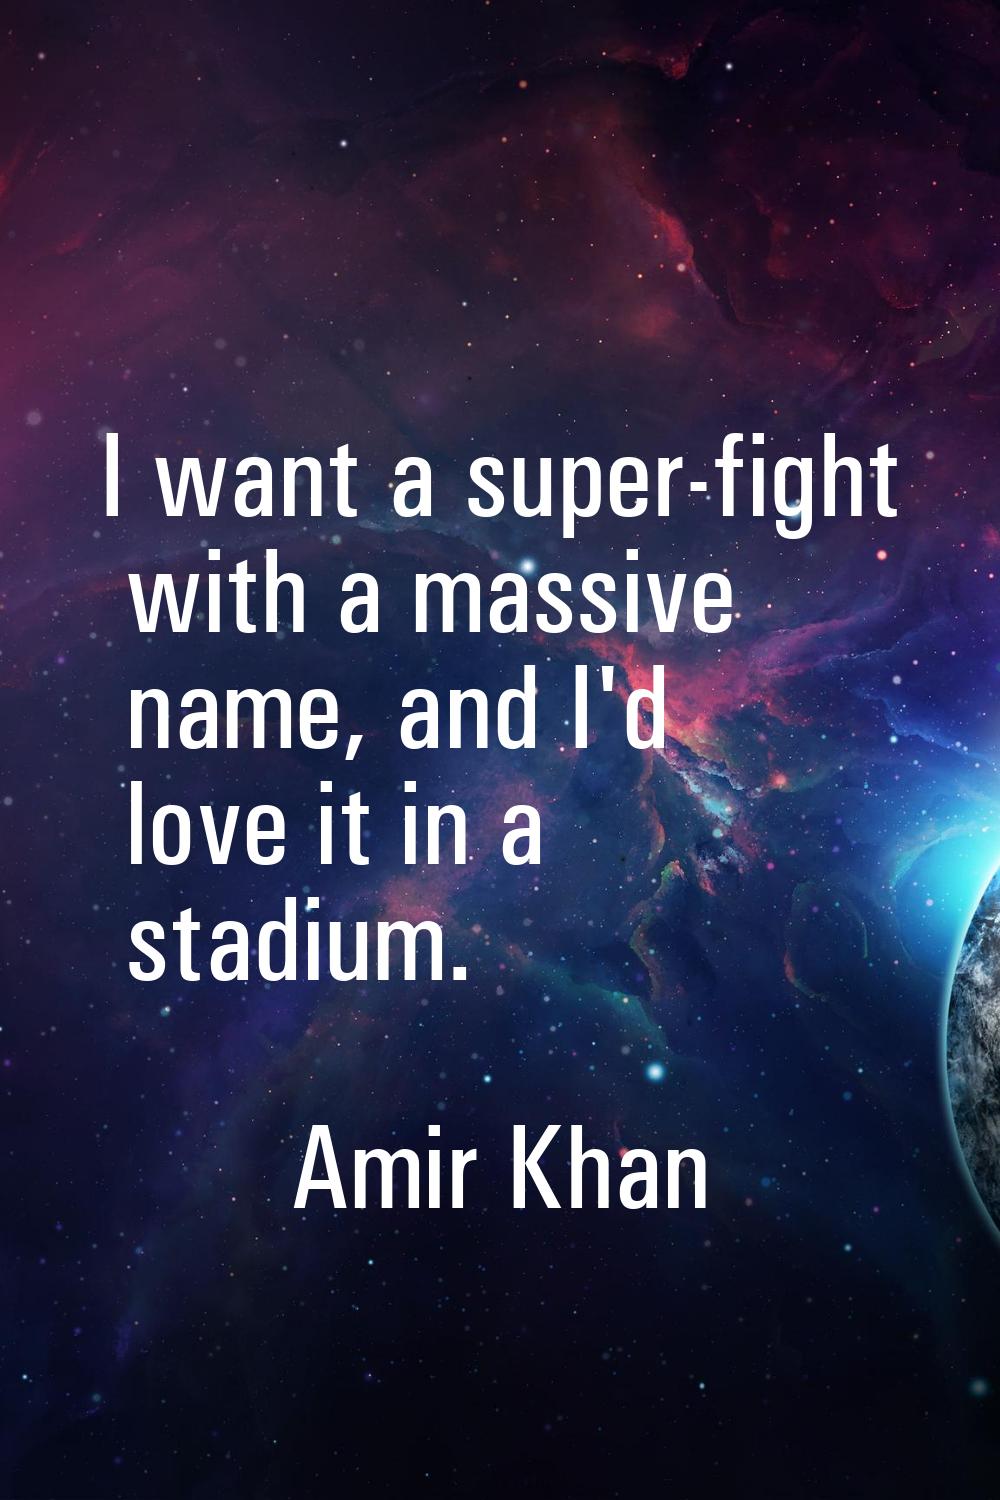 I want a super-fight with a massive name, and I'd love it in a stadium.